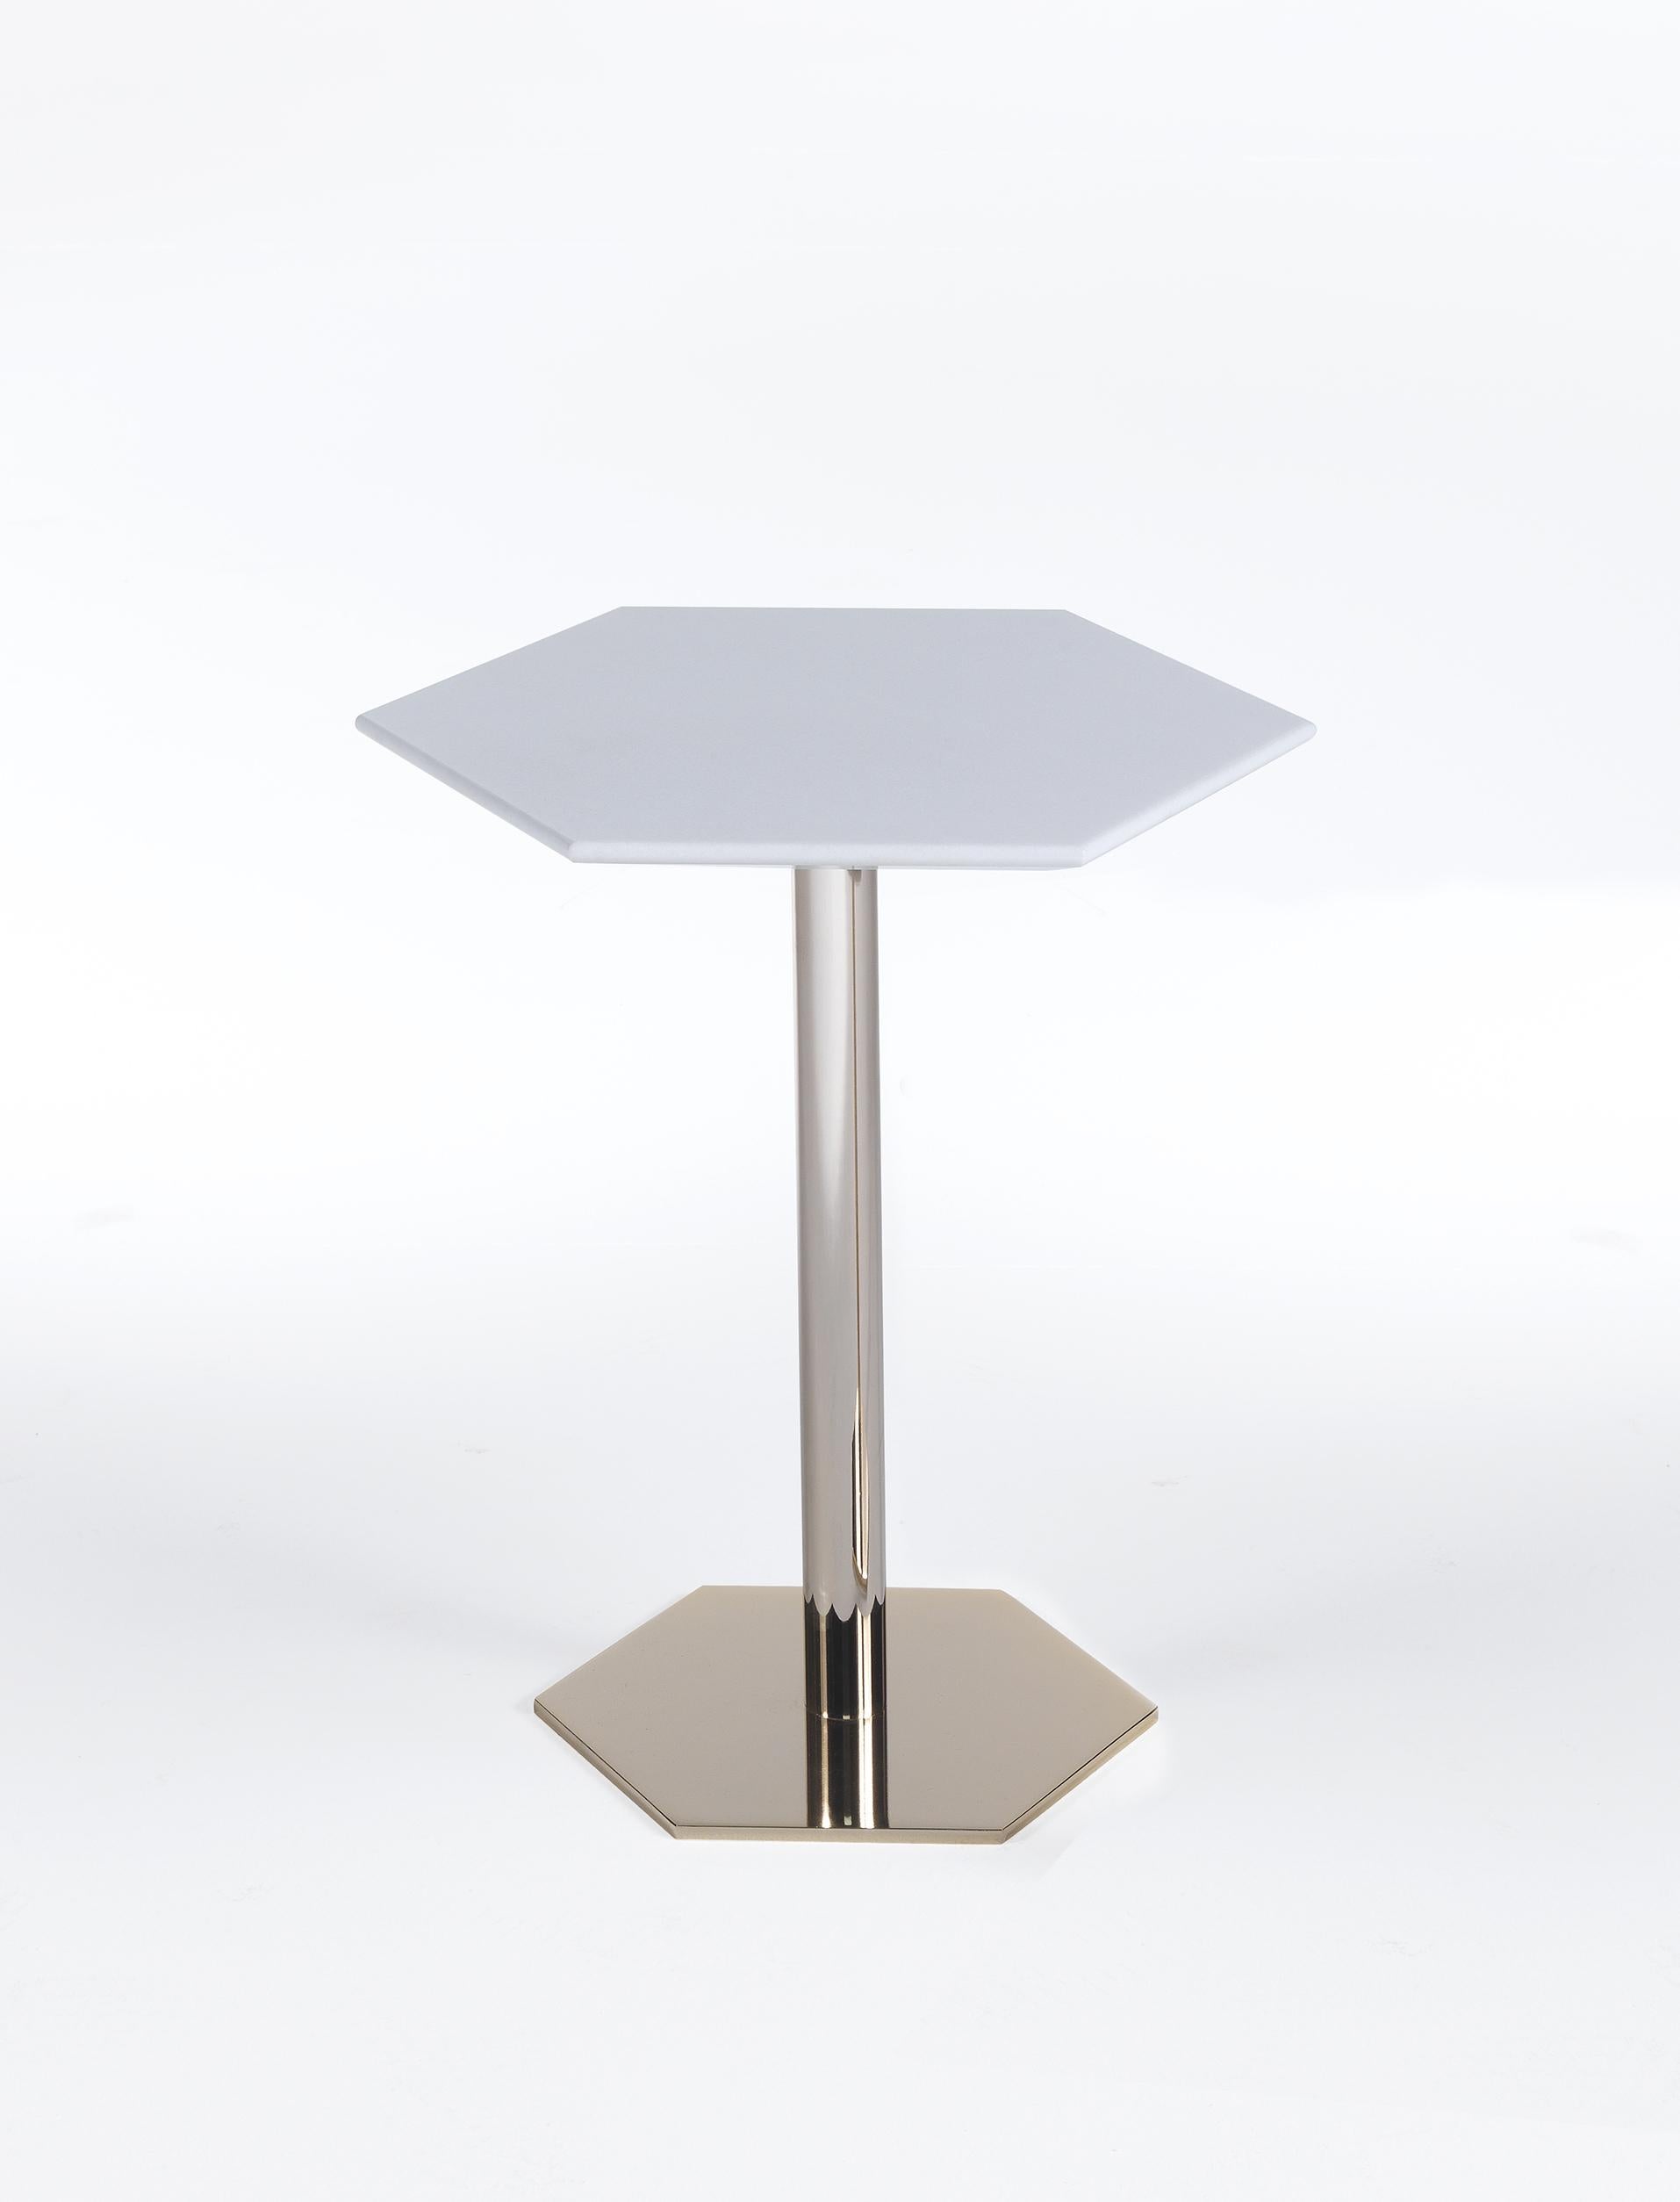 The eye-catching tall side table is perfect to enhance a modern interior or to add a fresh, contemporary look to a traditional one. The side table is composed of a one-legged polished brass base, that stems from an hexagonal foundation. The